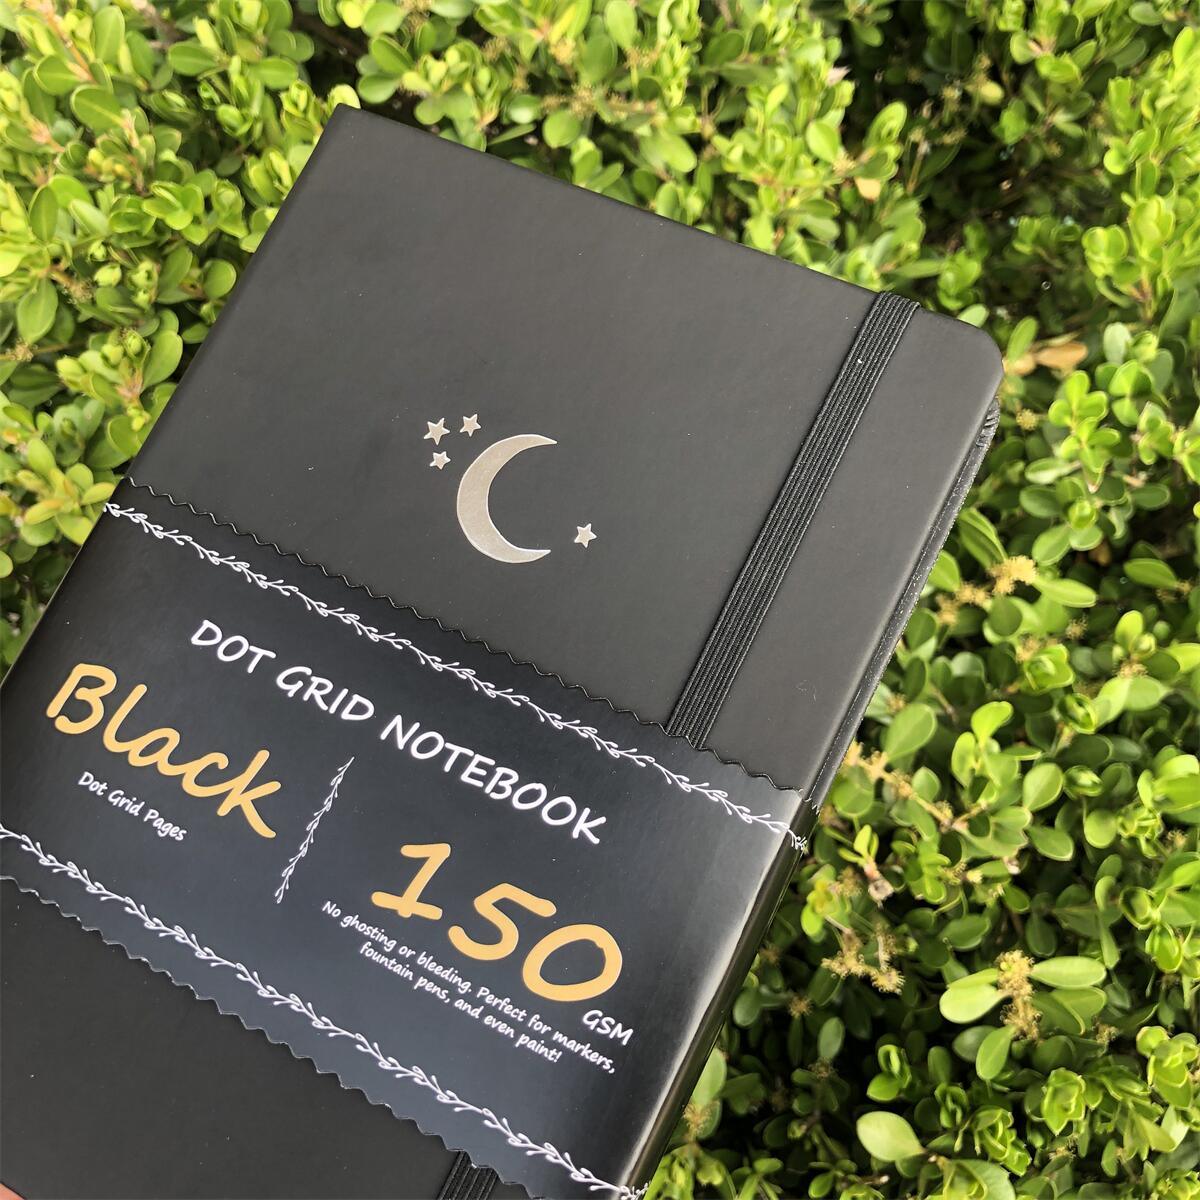 Bullet Journal Notebooks with black paper